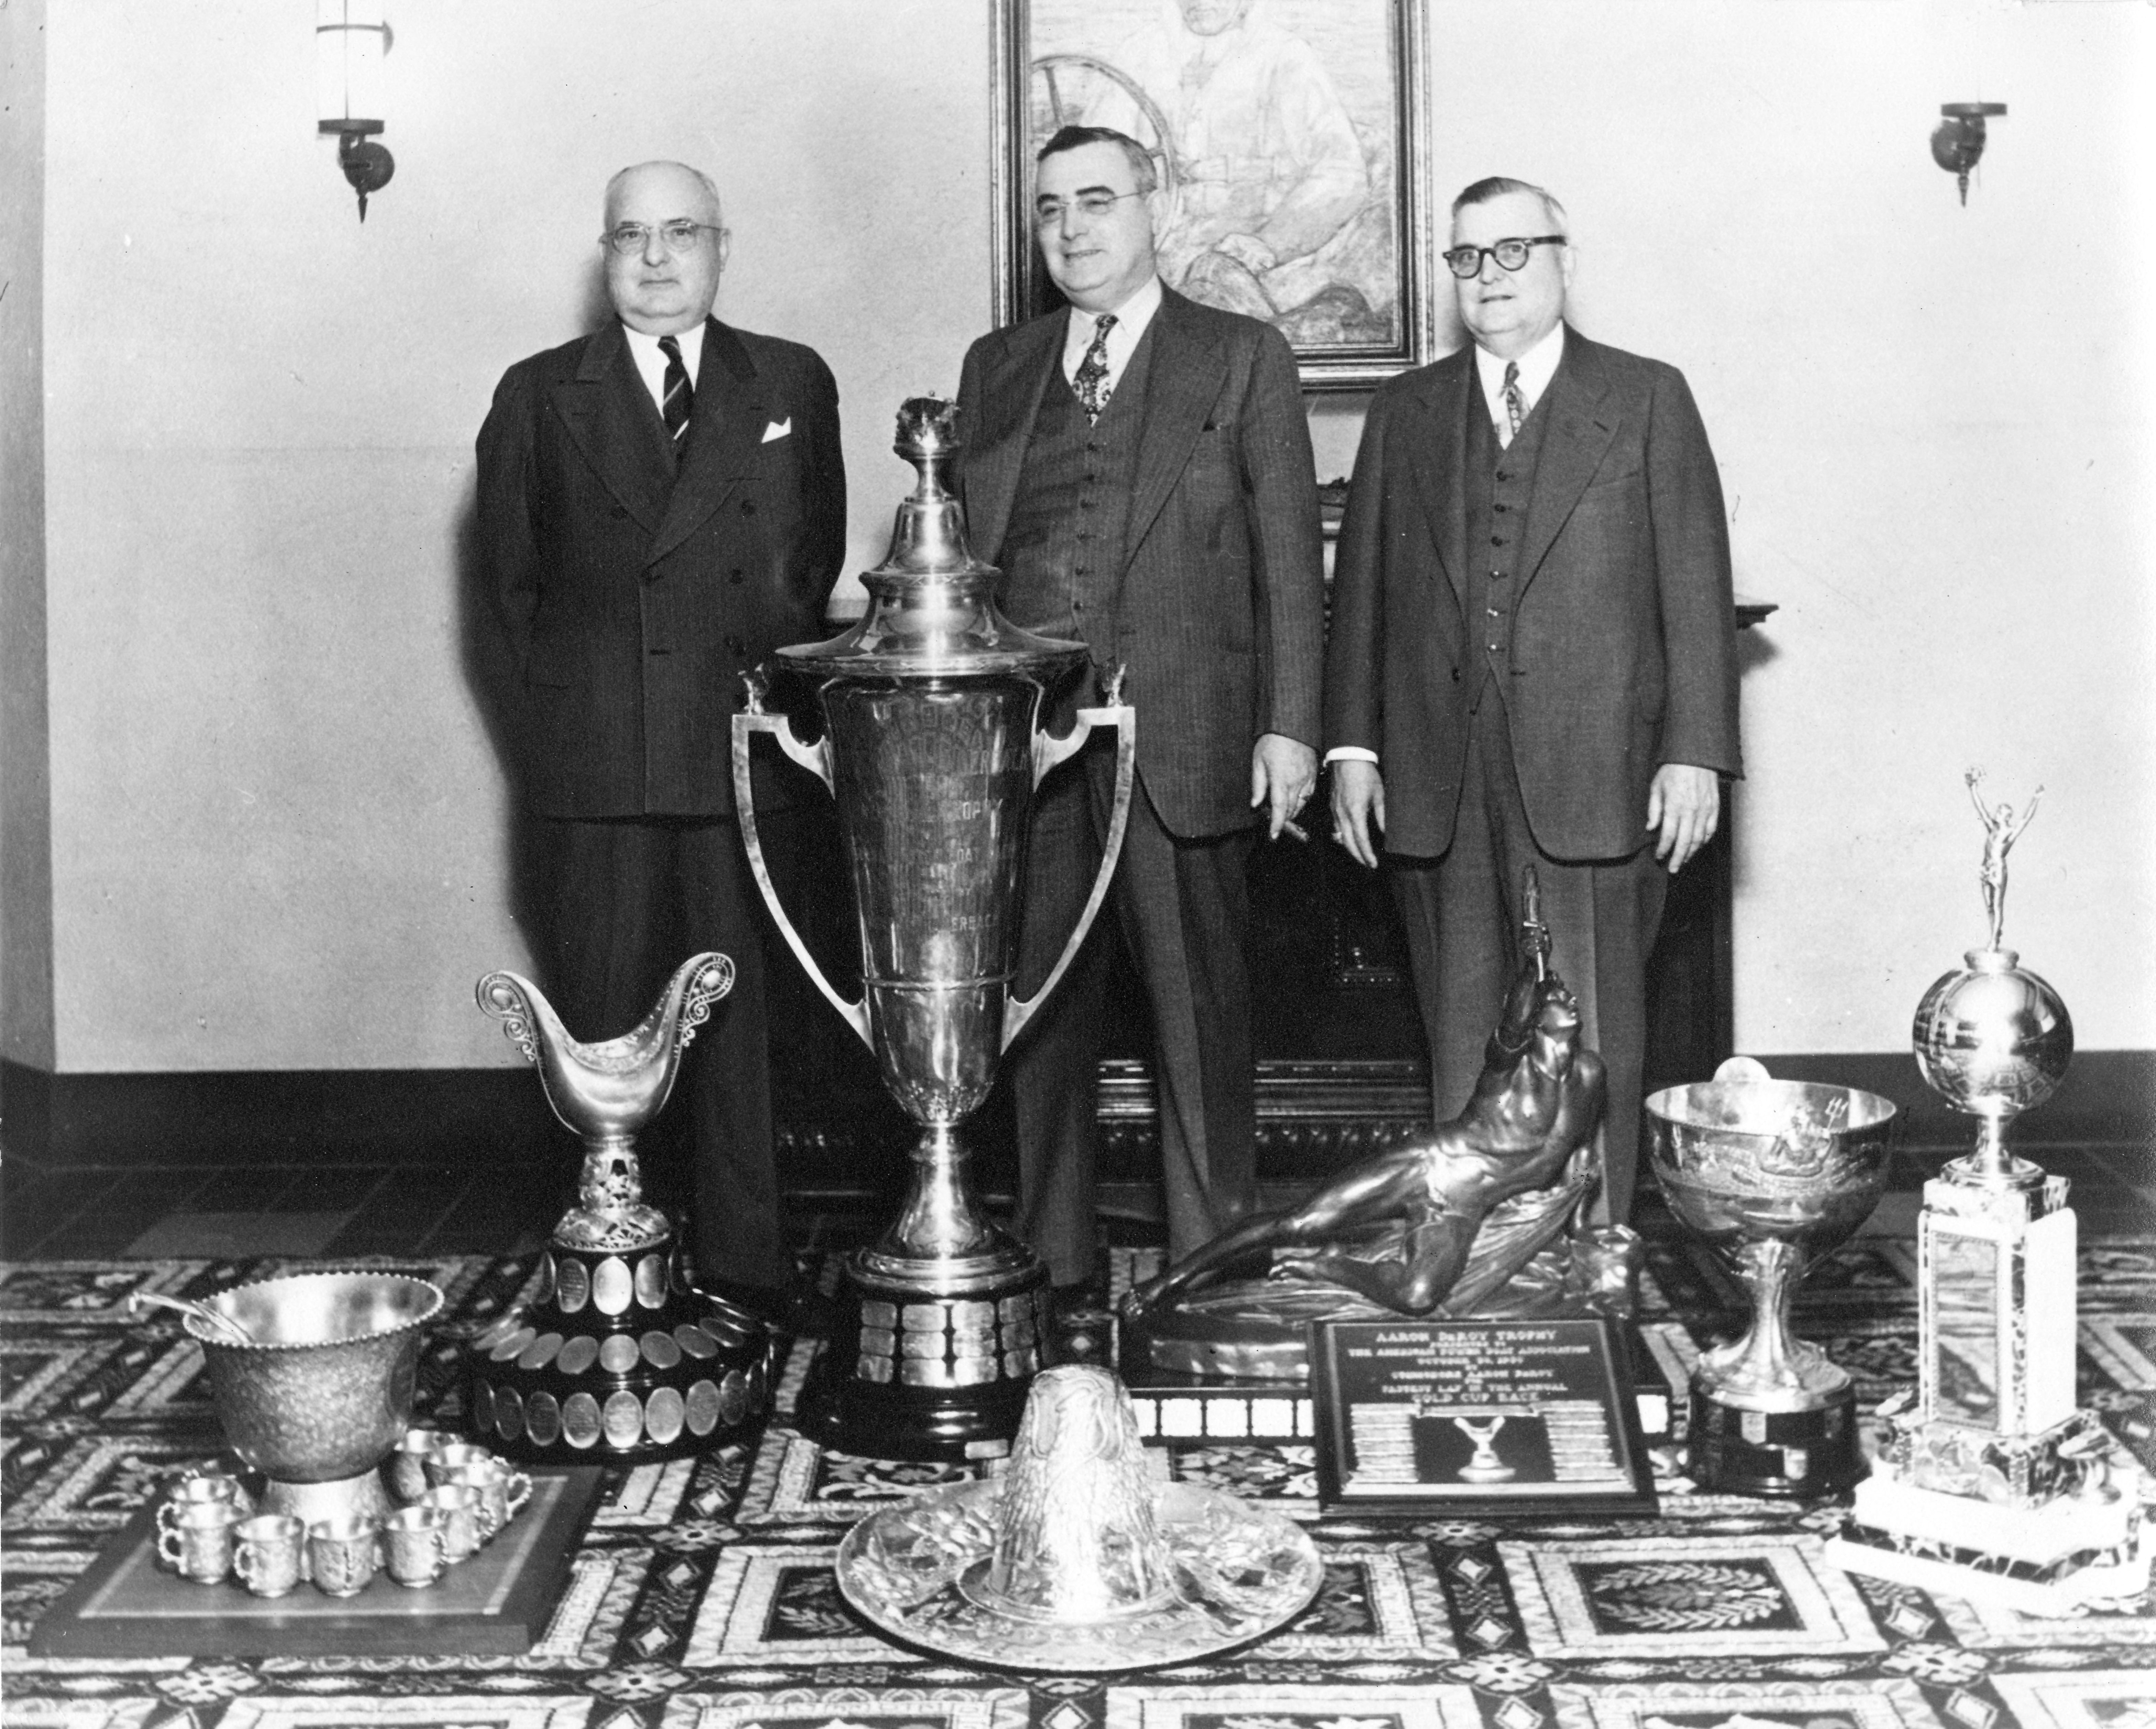 The Dossin Brothers with a few of their trophies